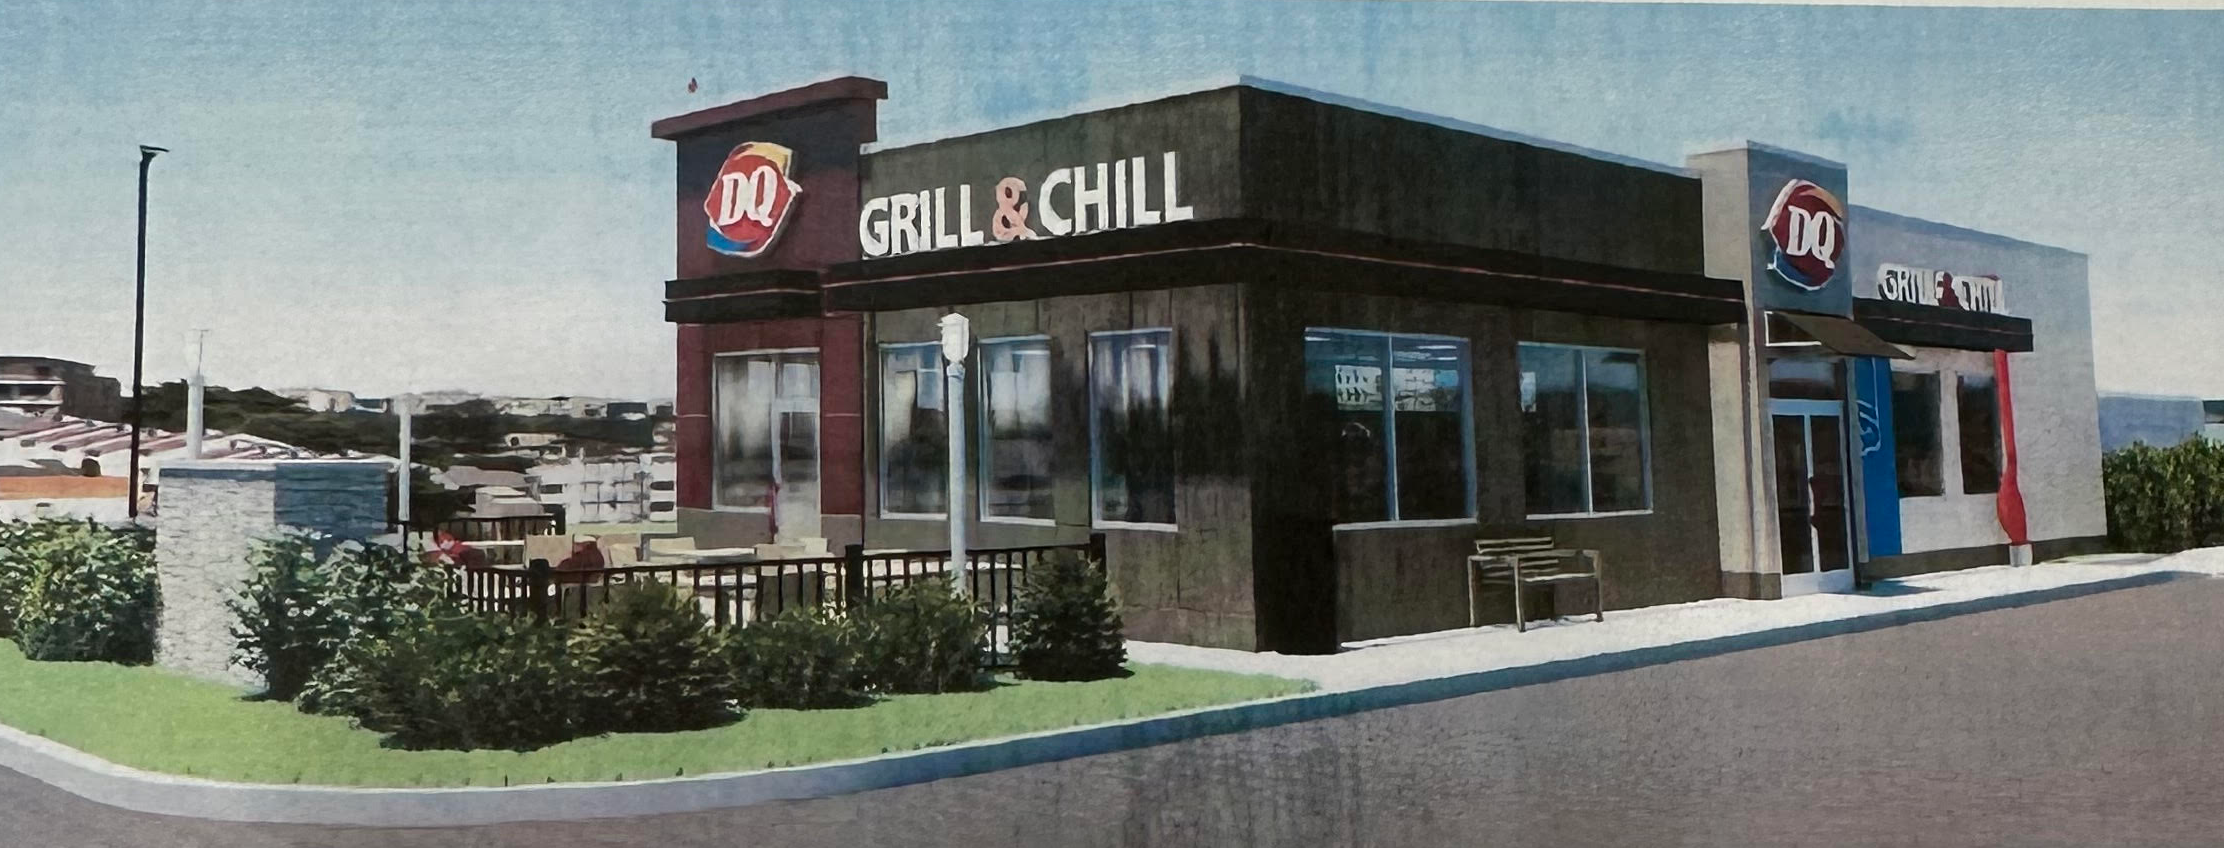 Dairy Queen’s New Location Will Have Modern Look, More Seating Main Photo